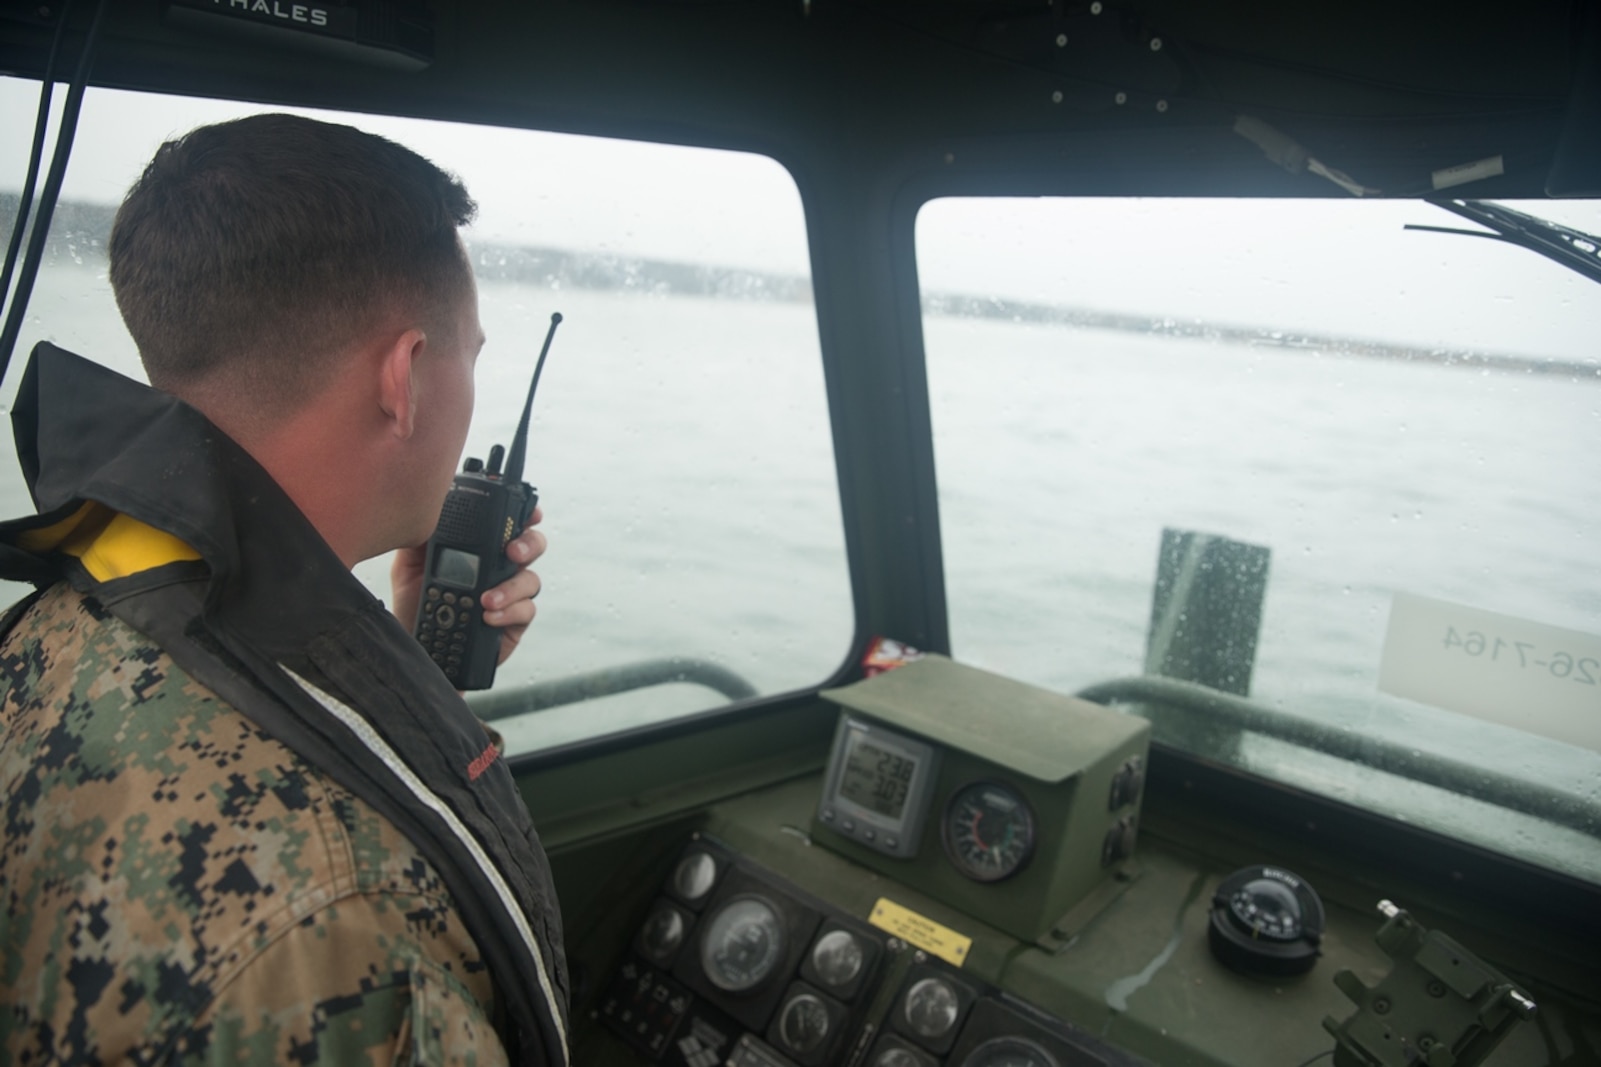 U.S. Marine Cpl. Braxton Shrader, a combat engineer with Bridge Company, 7th Engineer Support Battalion, 1st Marine Logistics Group communicates over the radio on a Bridge Erection Boat (BEB) during the boat licensing course along the coast of Camp Pendleton, Calif., June 21, 2017. The BEB deploys improved ribbon bridges, which are long two-way platforms used to transport heavy equipment, such as tanks, over bodies of water. (U.S. Marine Corps photo by Lance Cpl. Timothy Shoemaker)